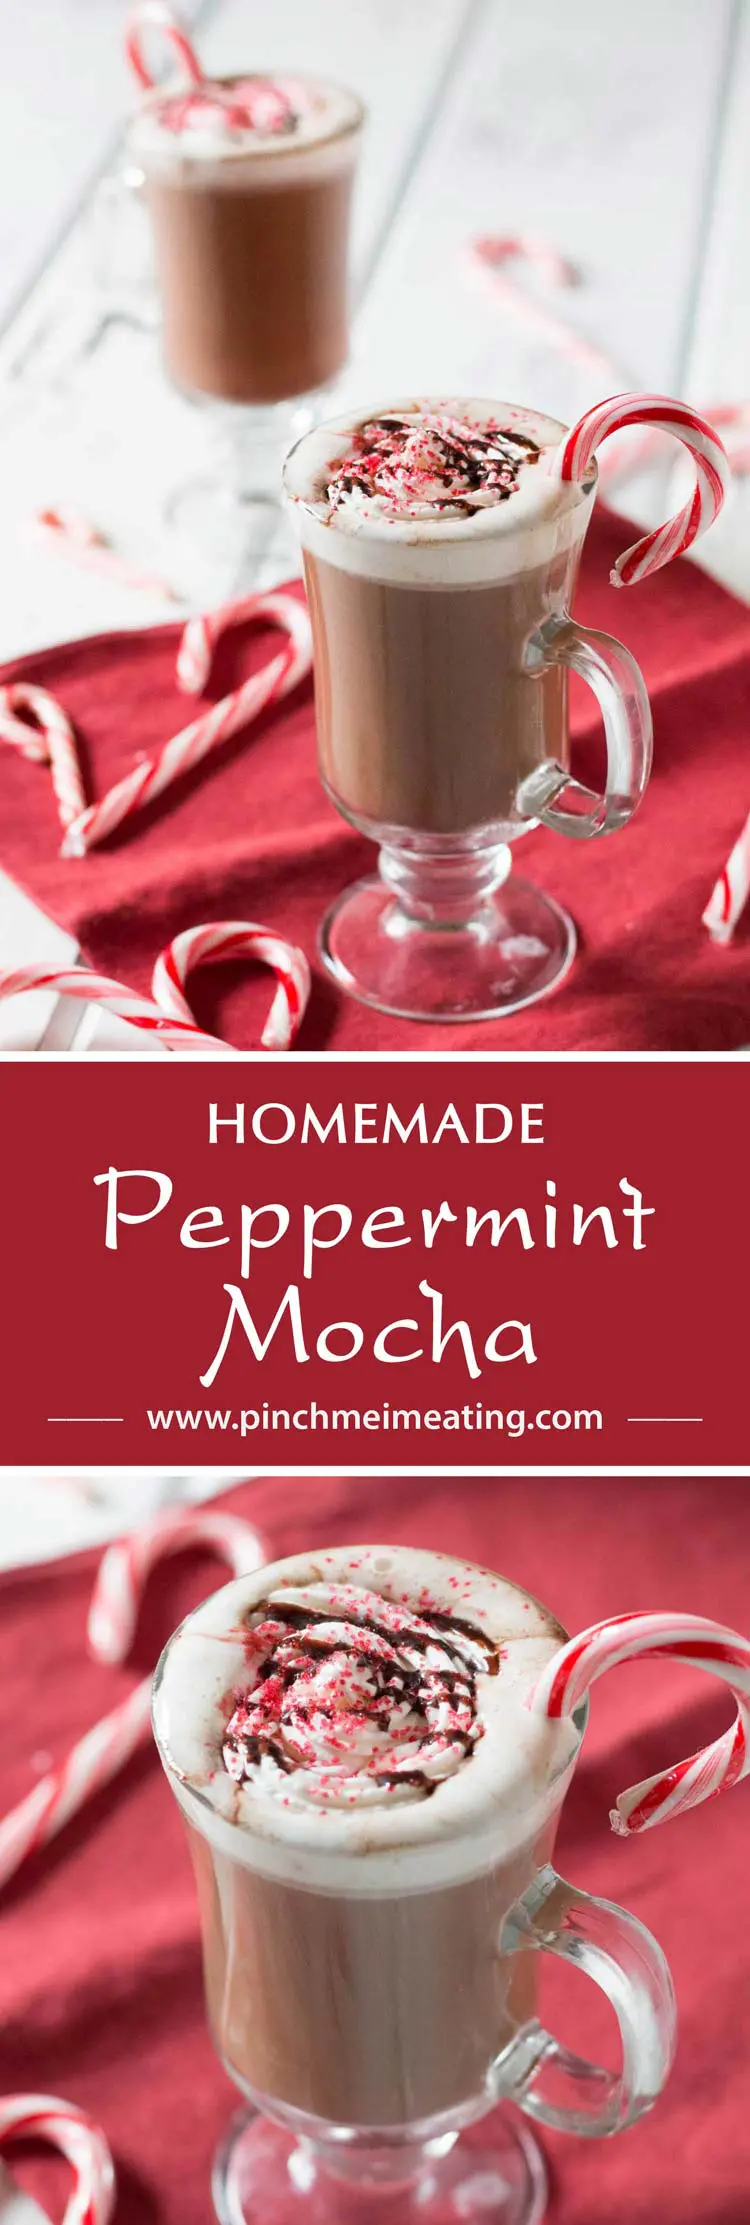 Why spend $5 on an expensive coffee drink when you can make your own homemade peppermint mocha in just a few minutes? No espresso maker or special syrups required!